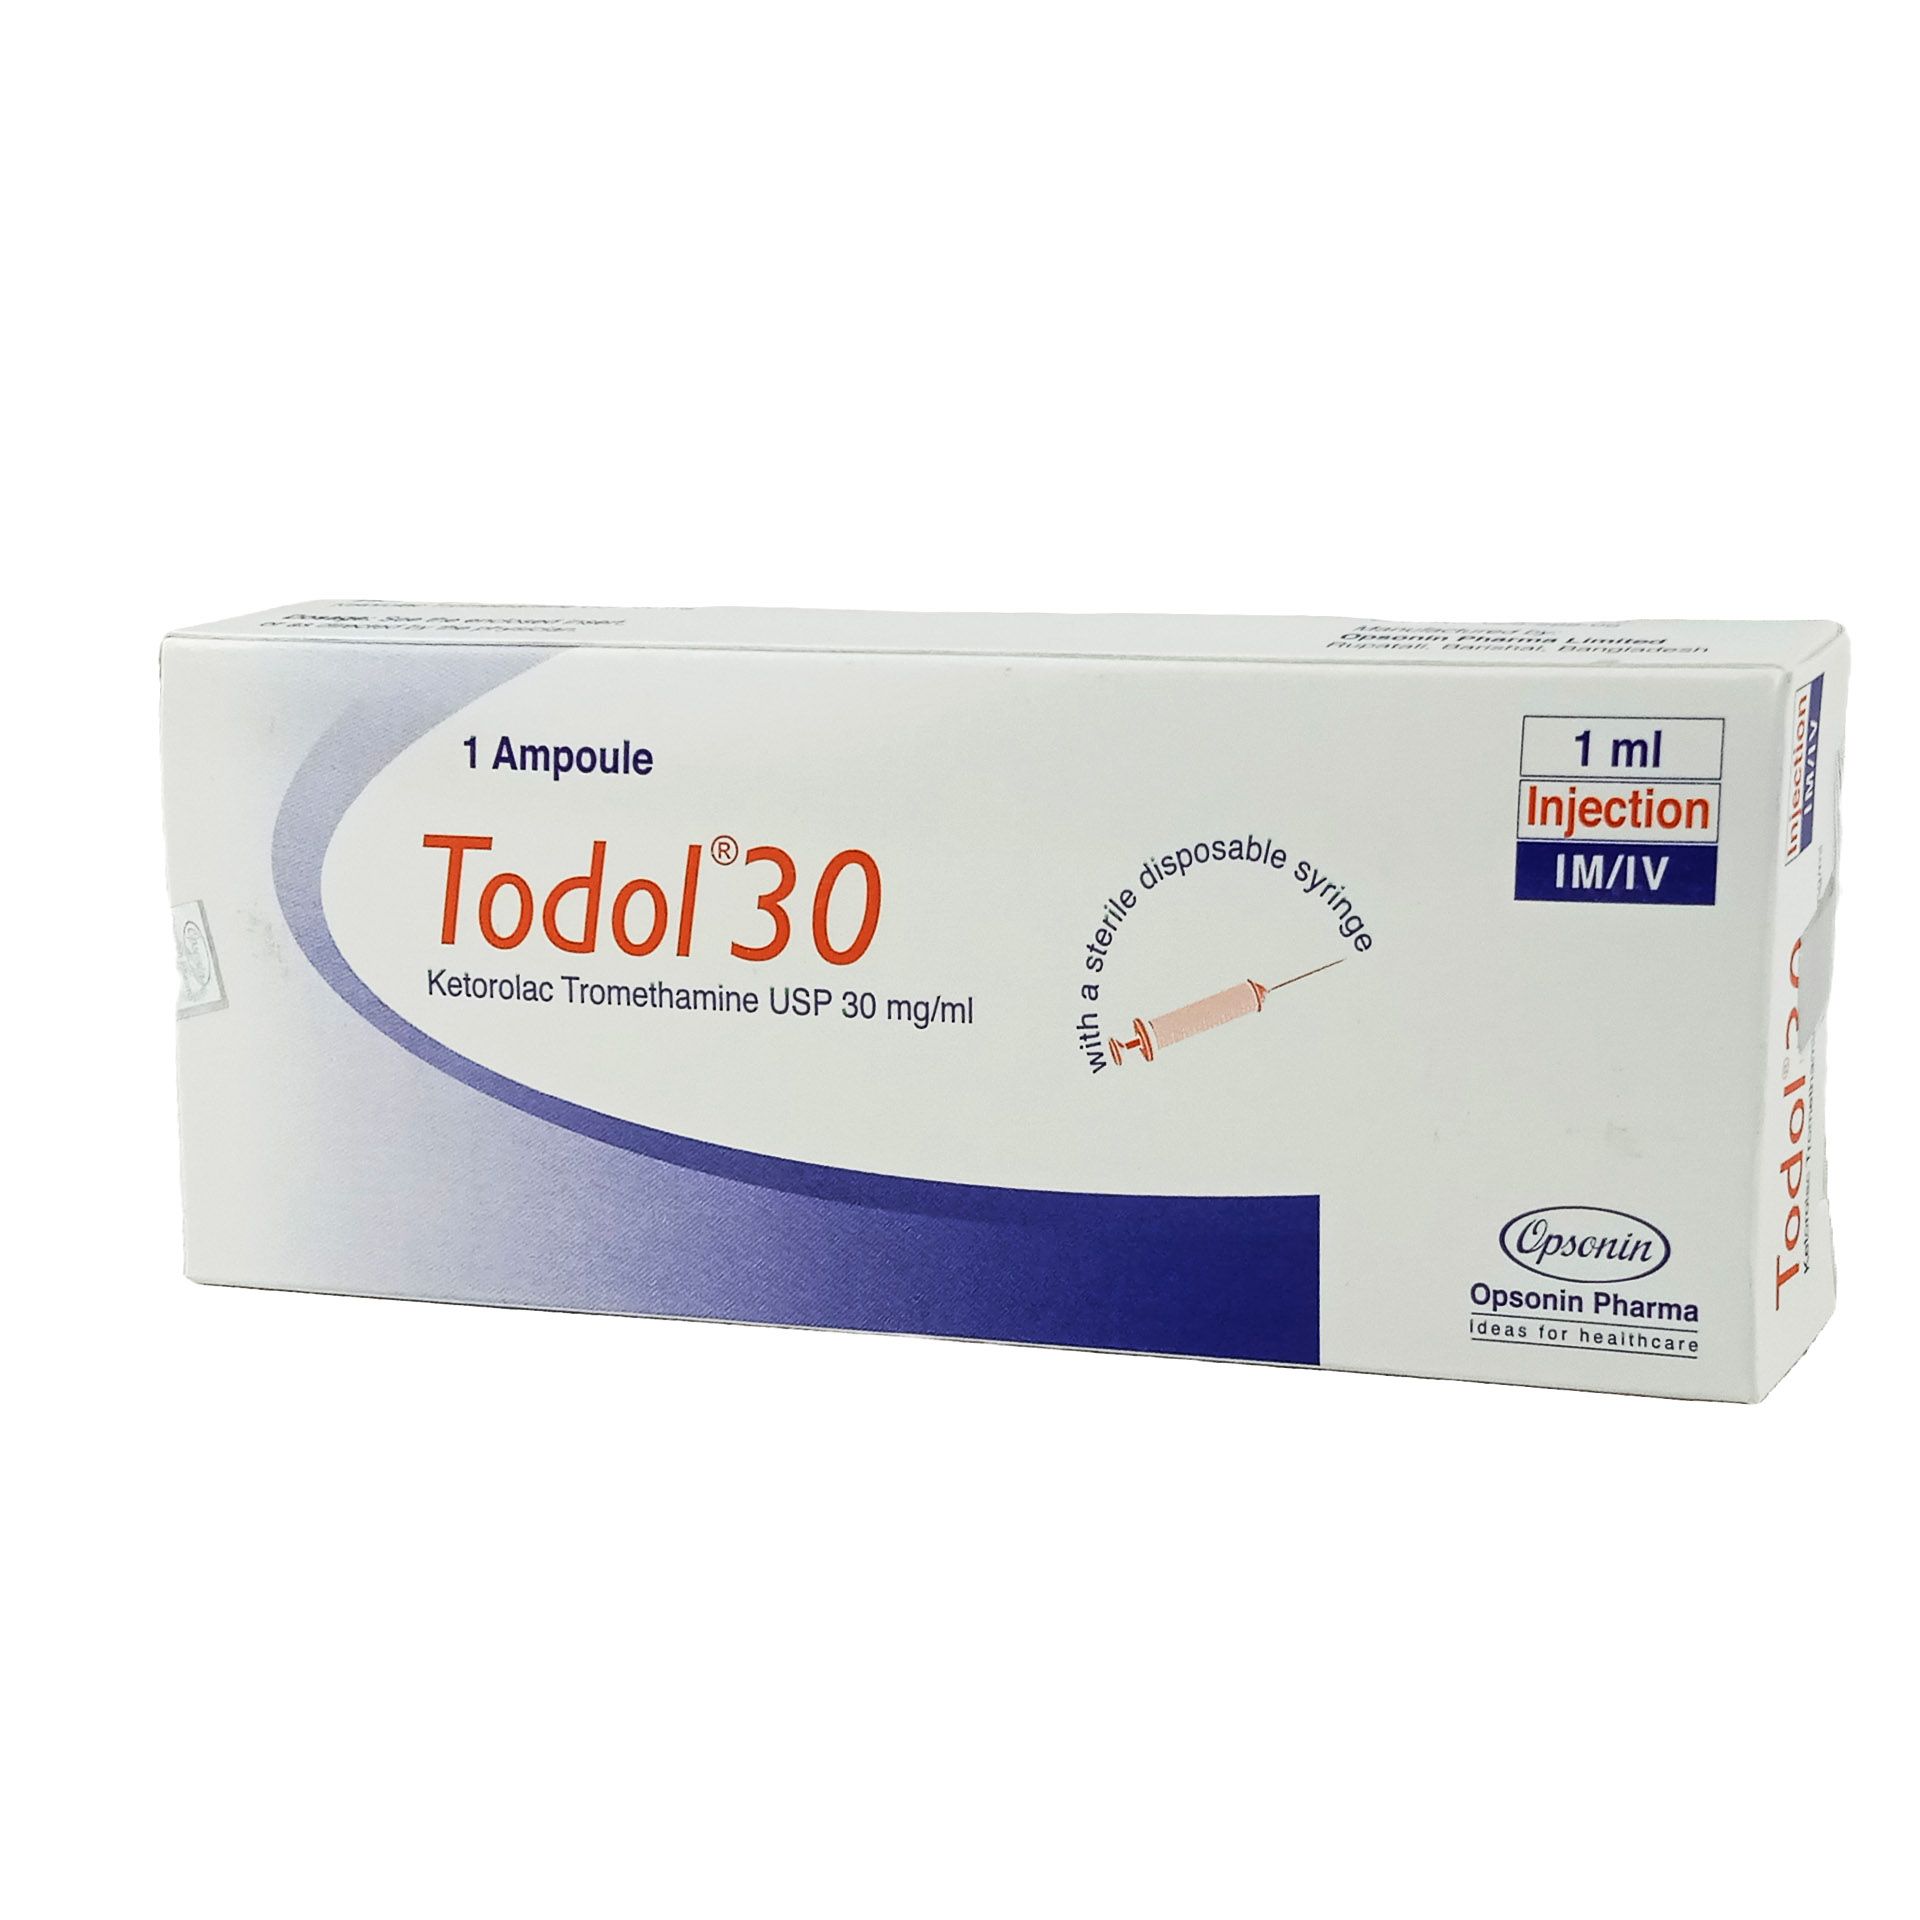 Todol 30mg/ml Injection